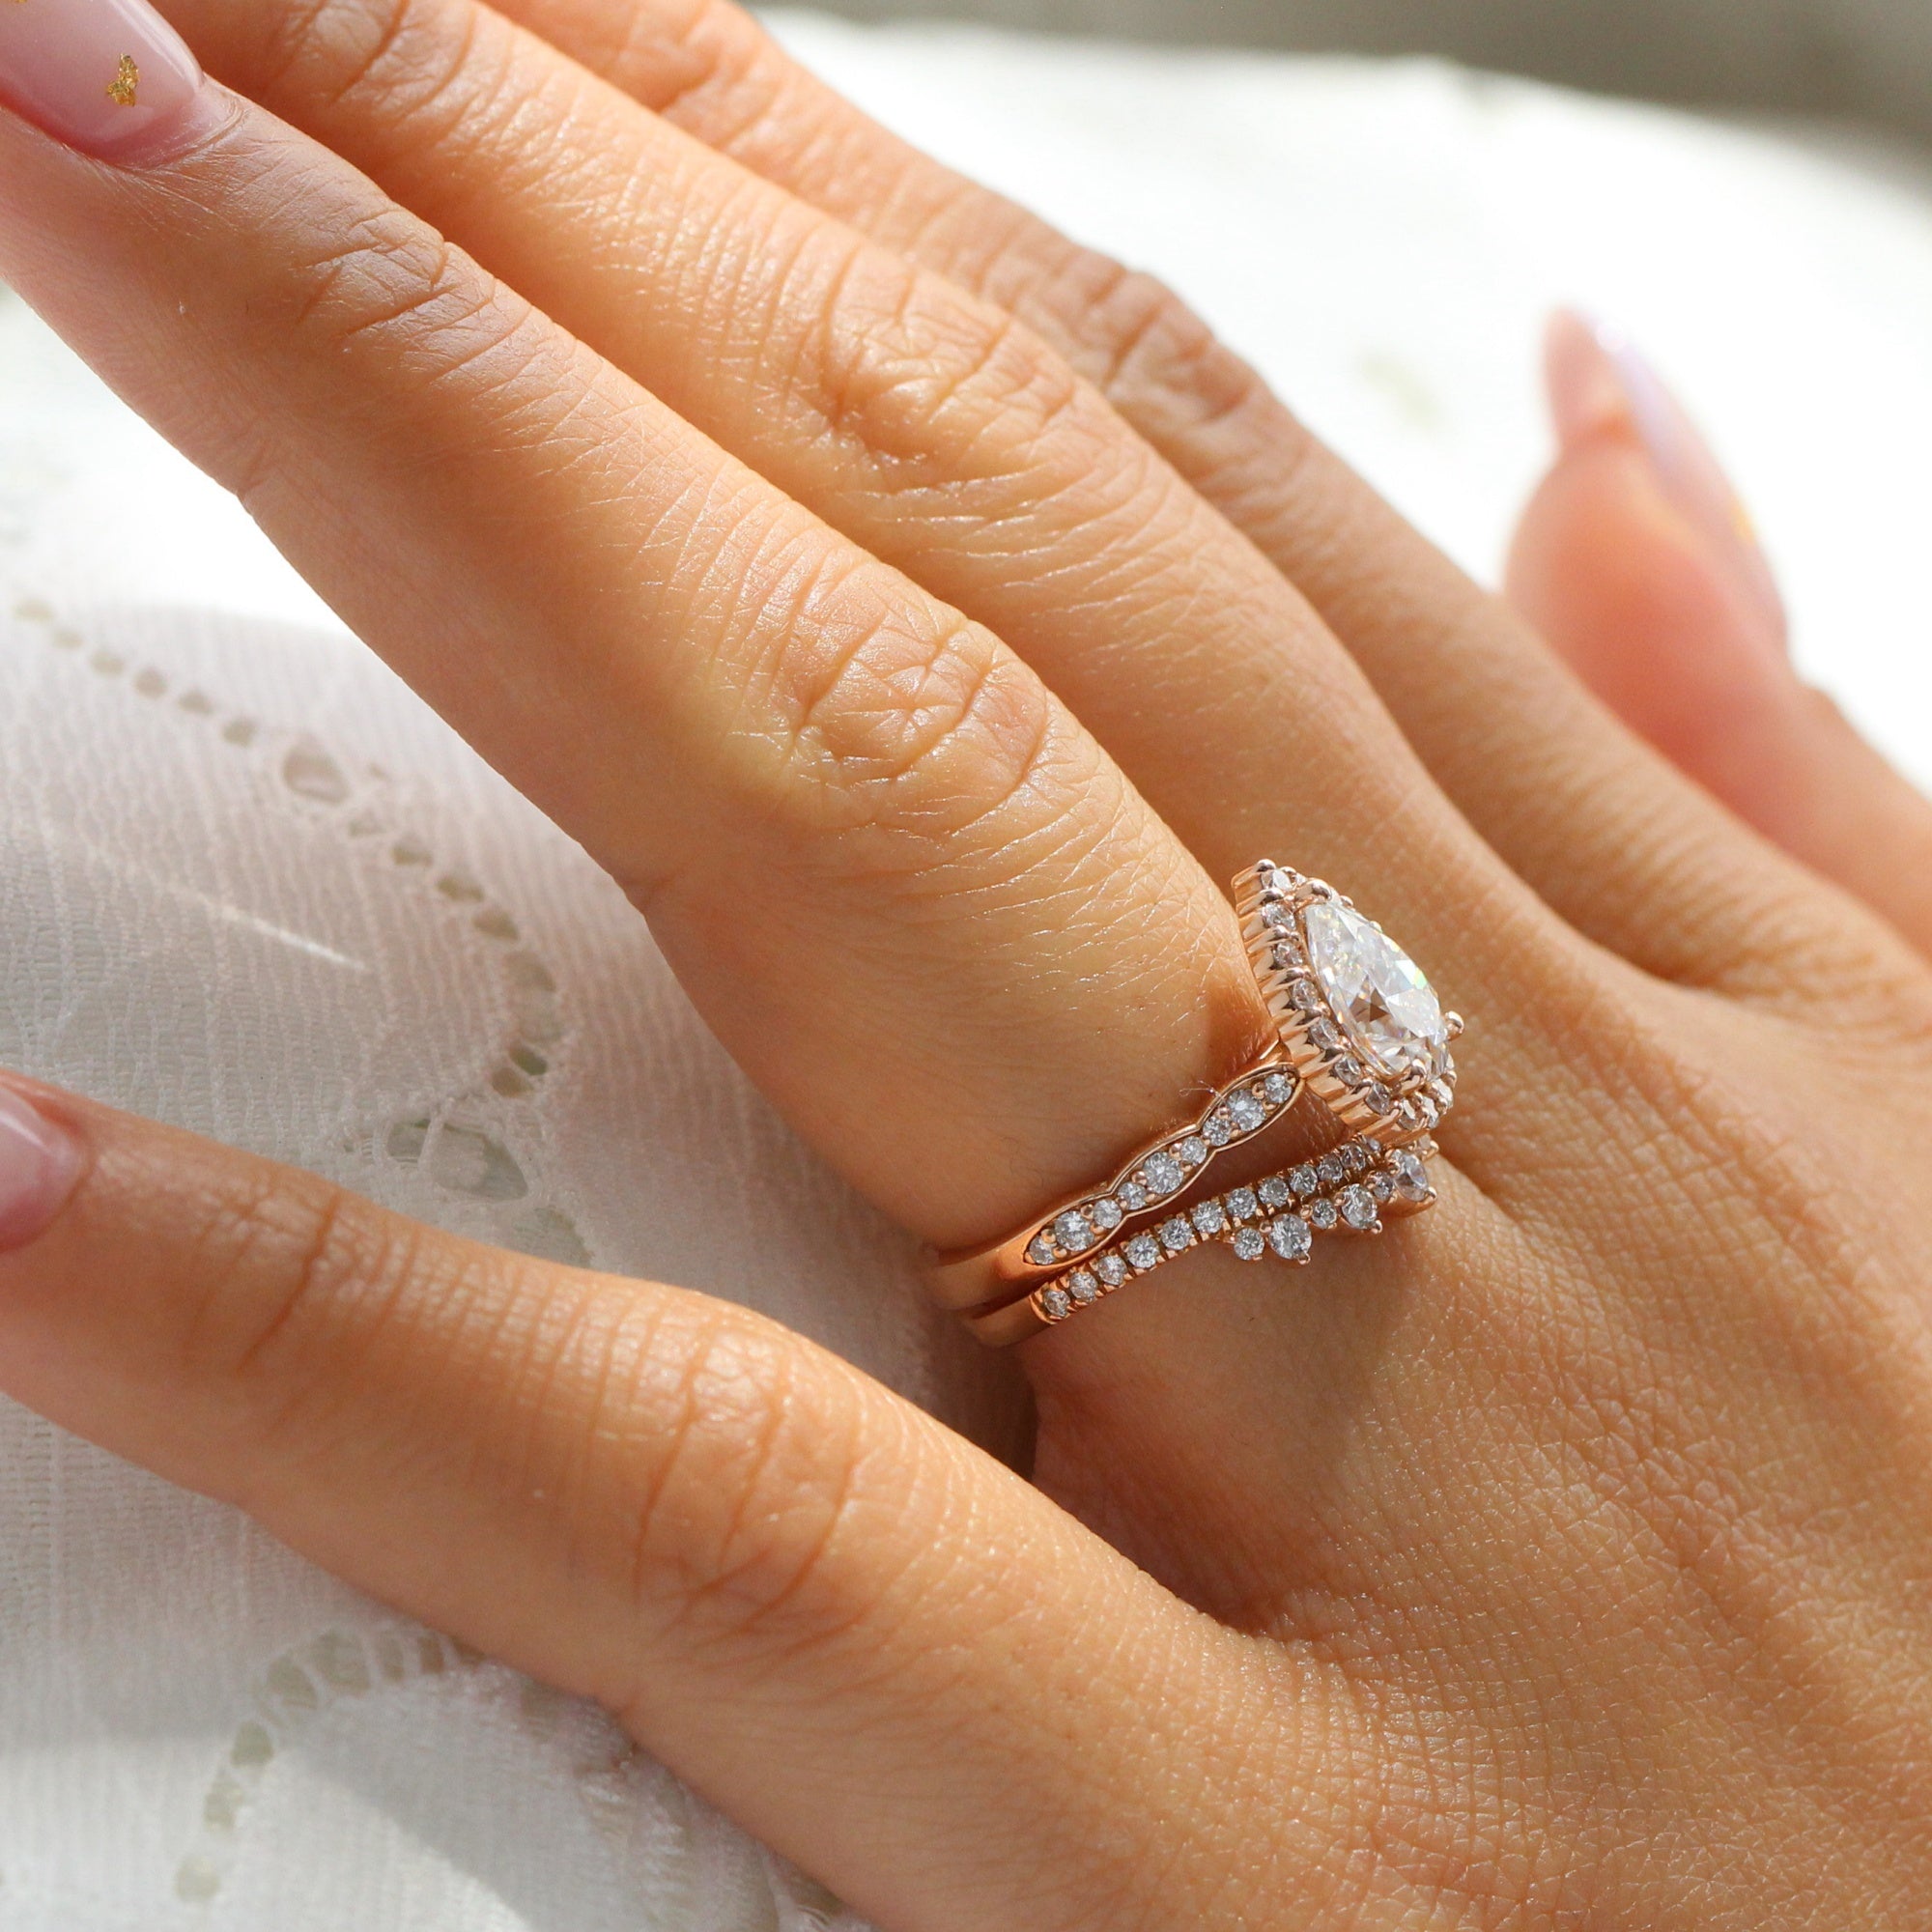 Wedding Rings and Bands, Bridal Jewellery